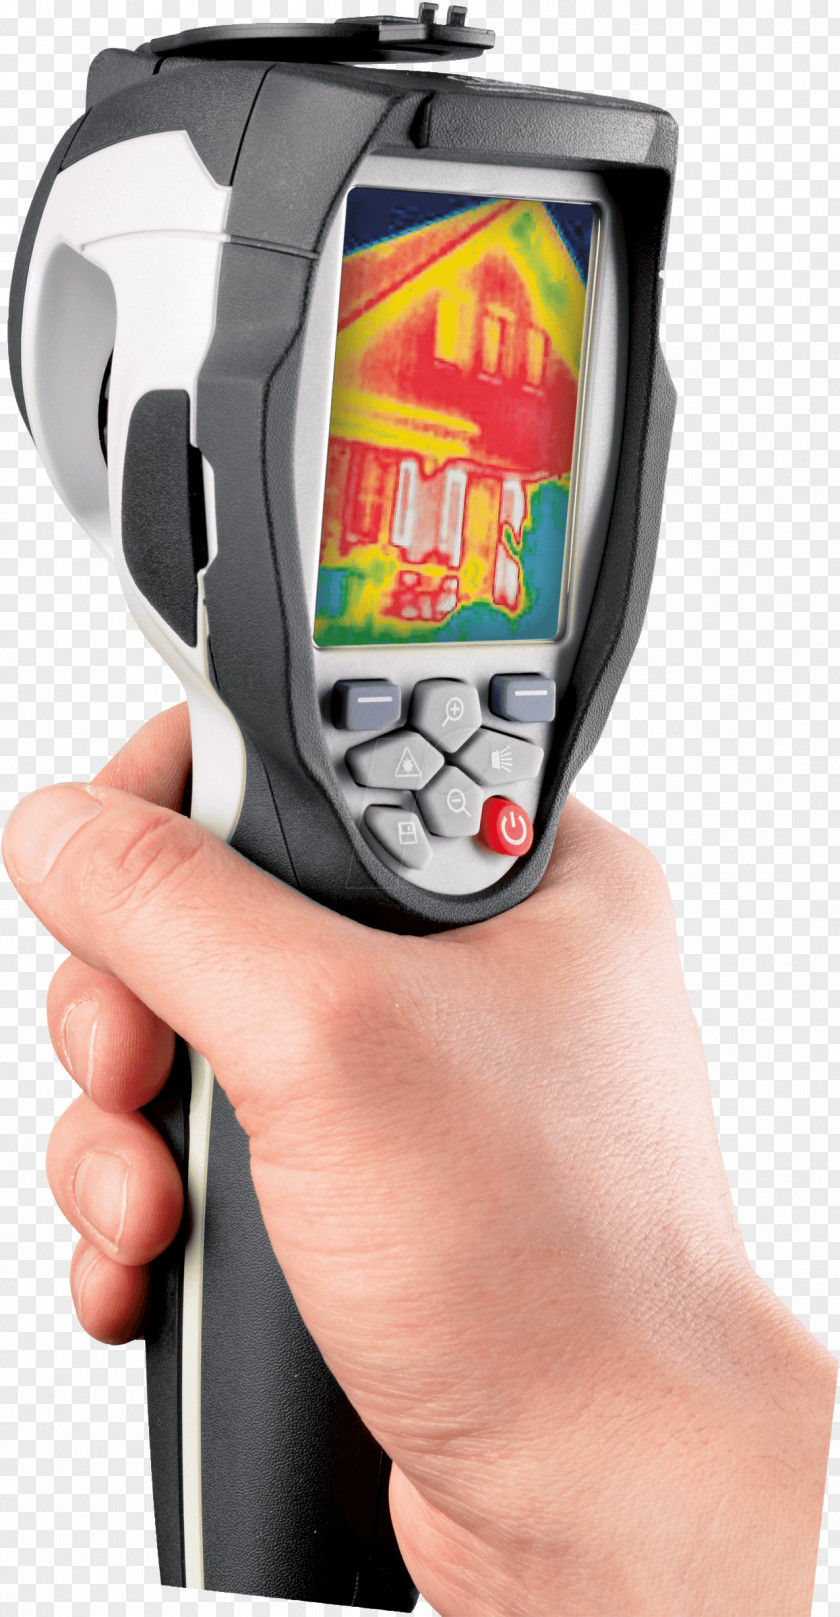 Thermographic Camera Thermography Thermal Imaging Pyrometer PNG